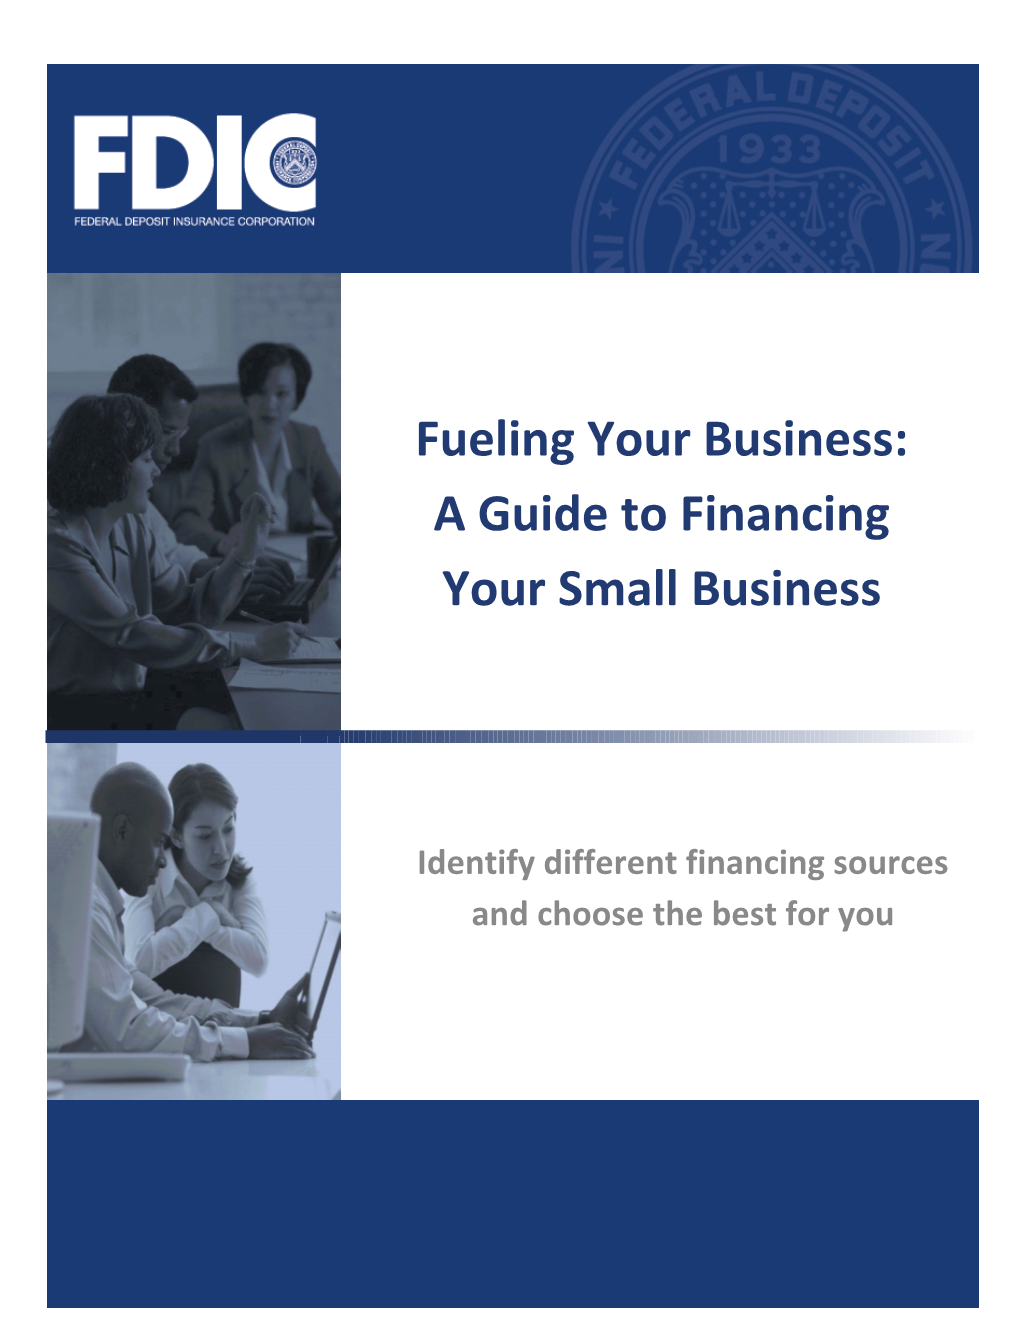 3-2 Fueling Your Business - A Guide To Financing Your Small Business